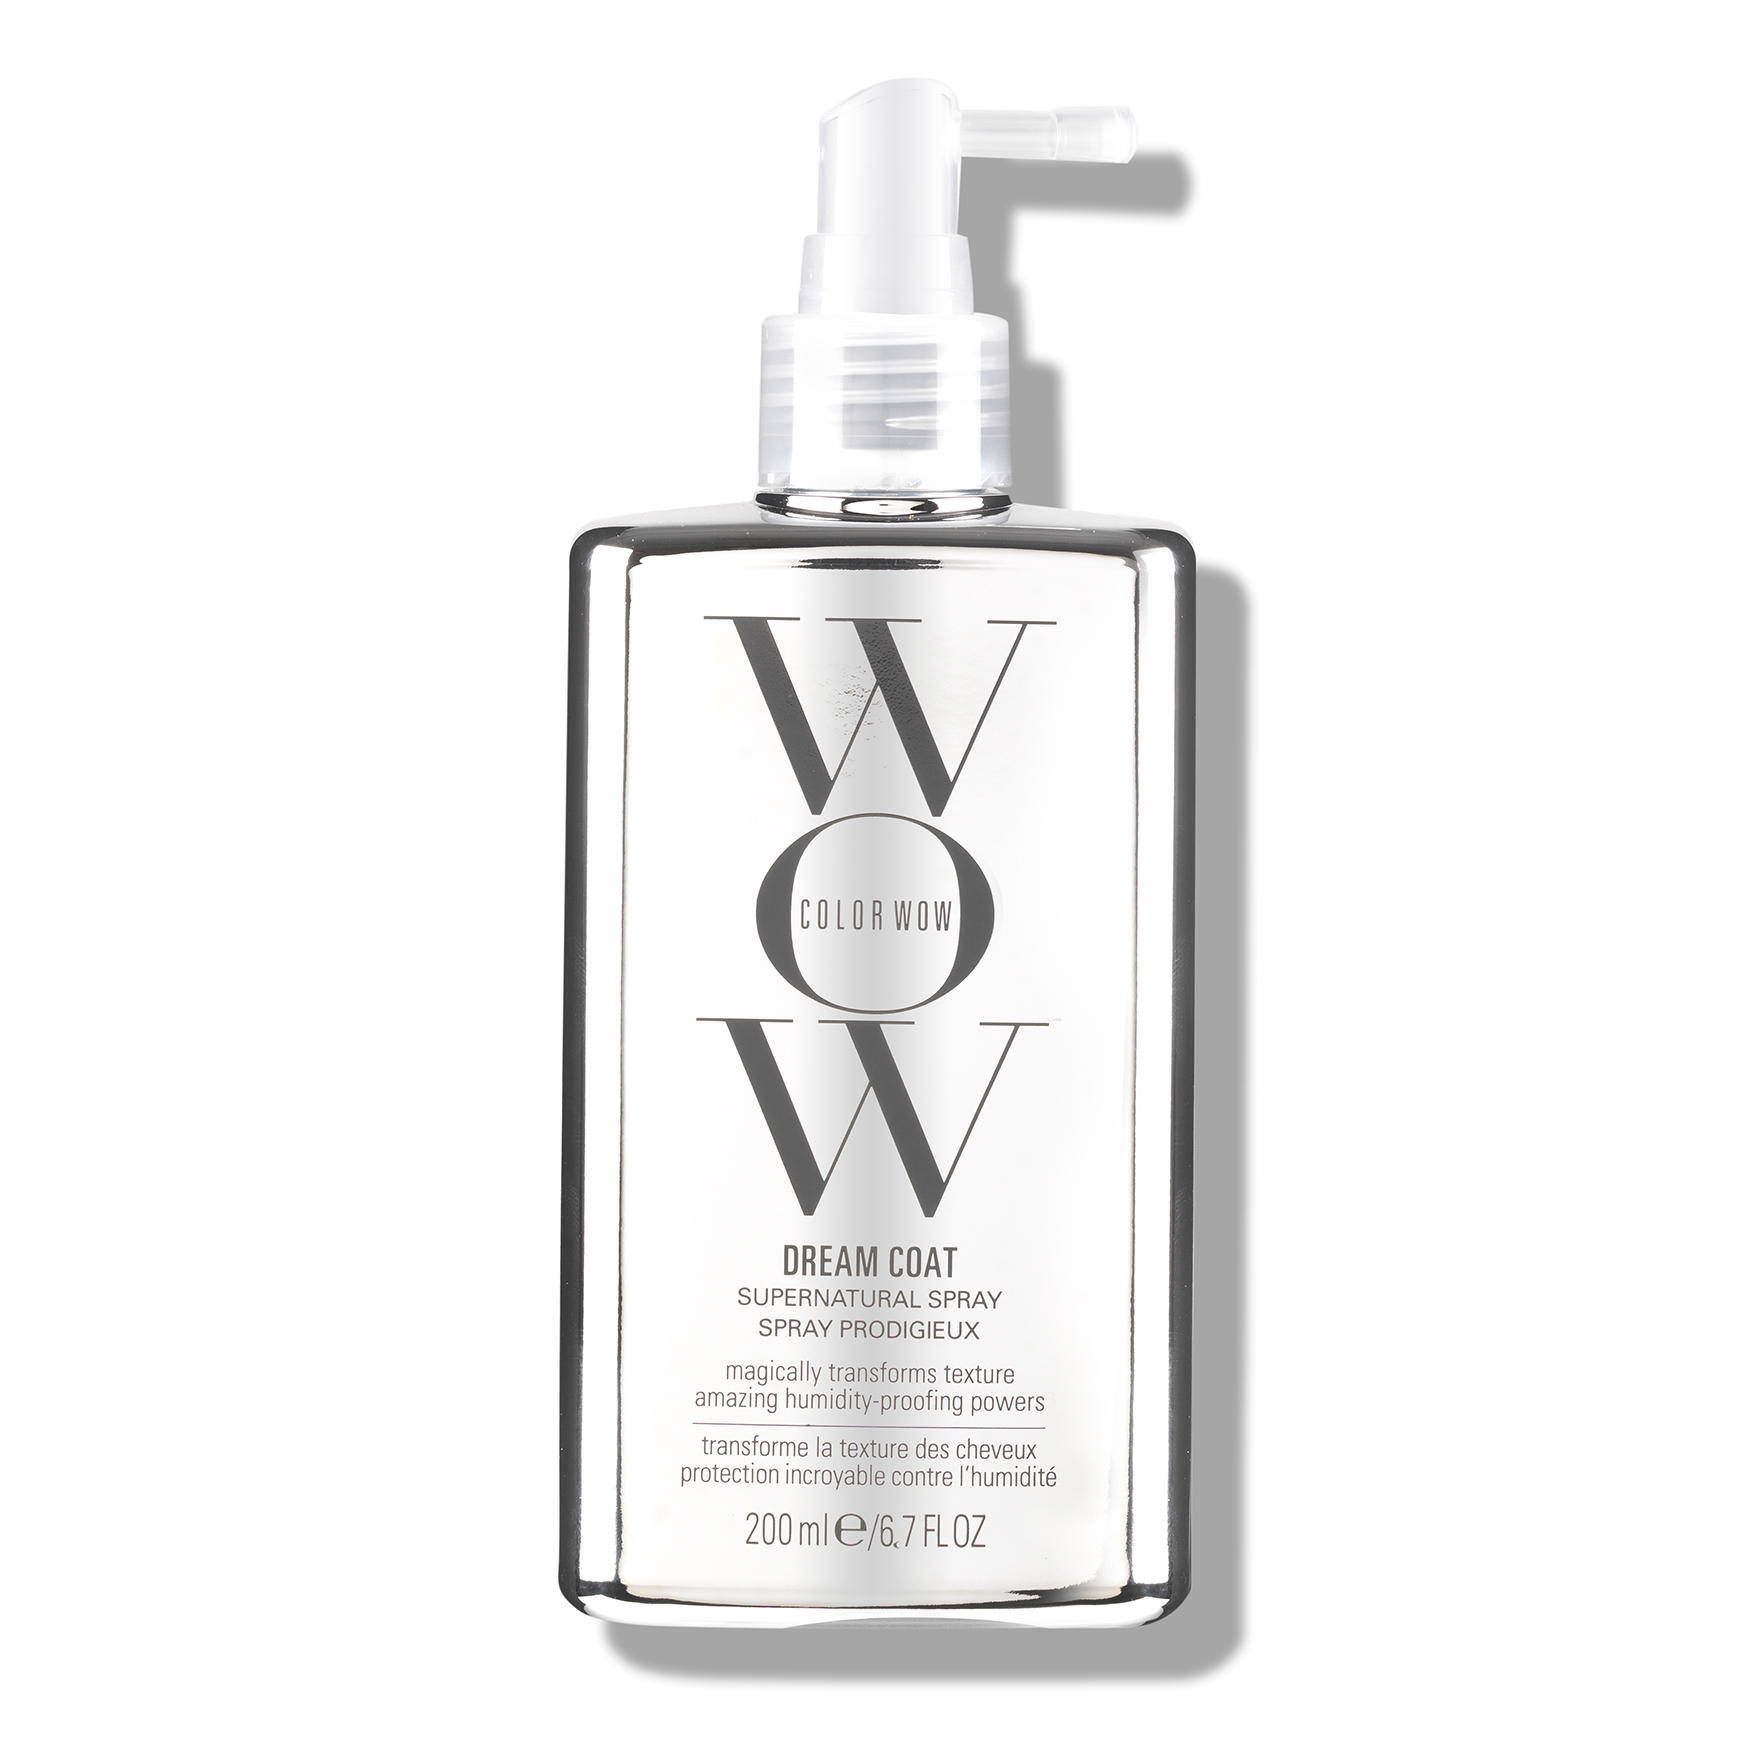 Color Wow Dream Coat Supernatural Spray | Space NK